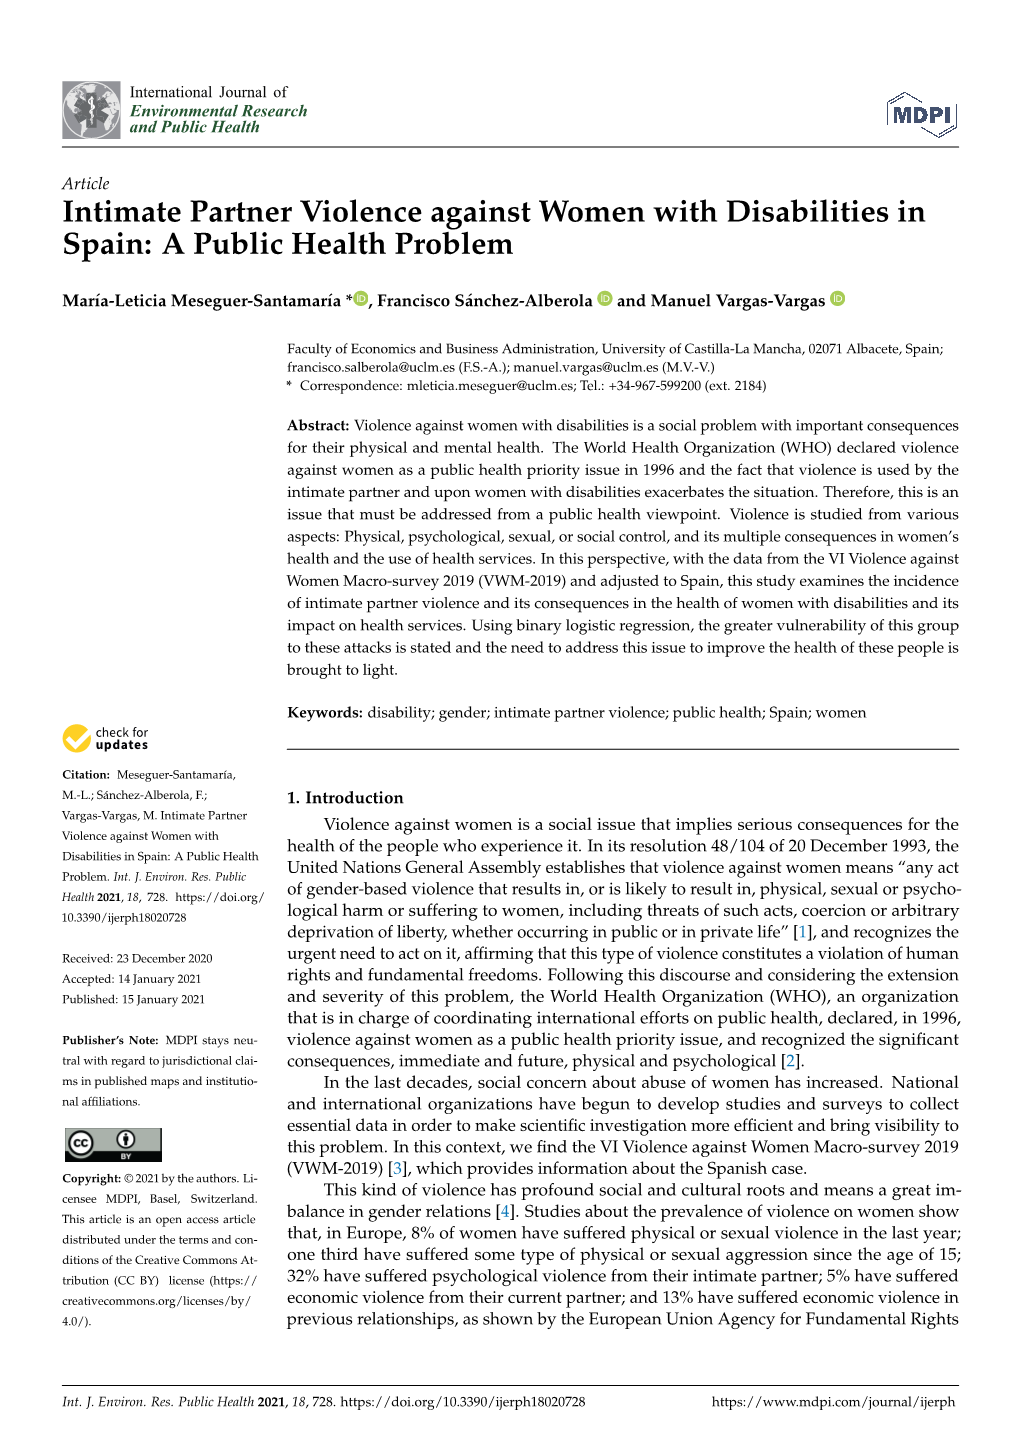 Intimate Partner Violence Against Women with Disabilities in Spain: a Public Health Problem